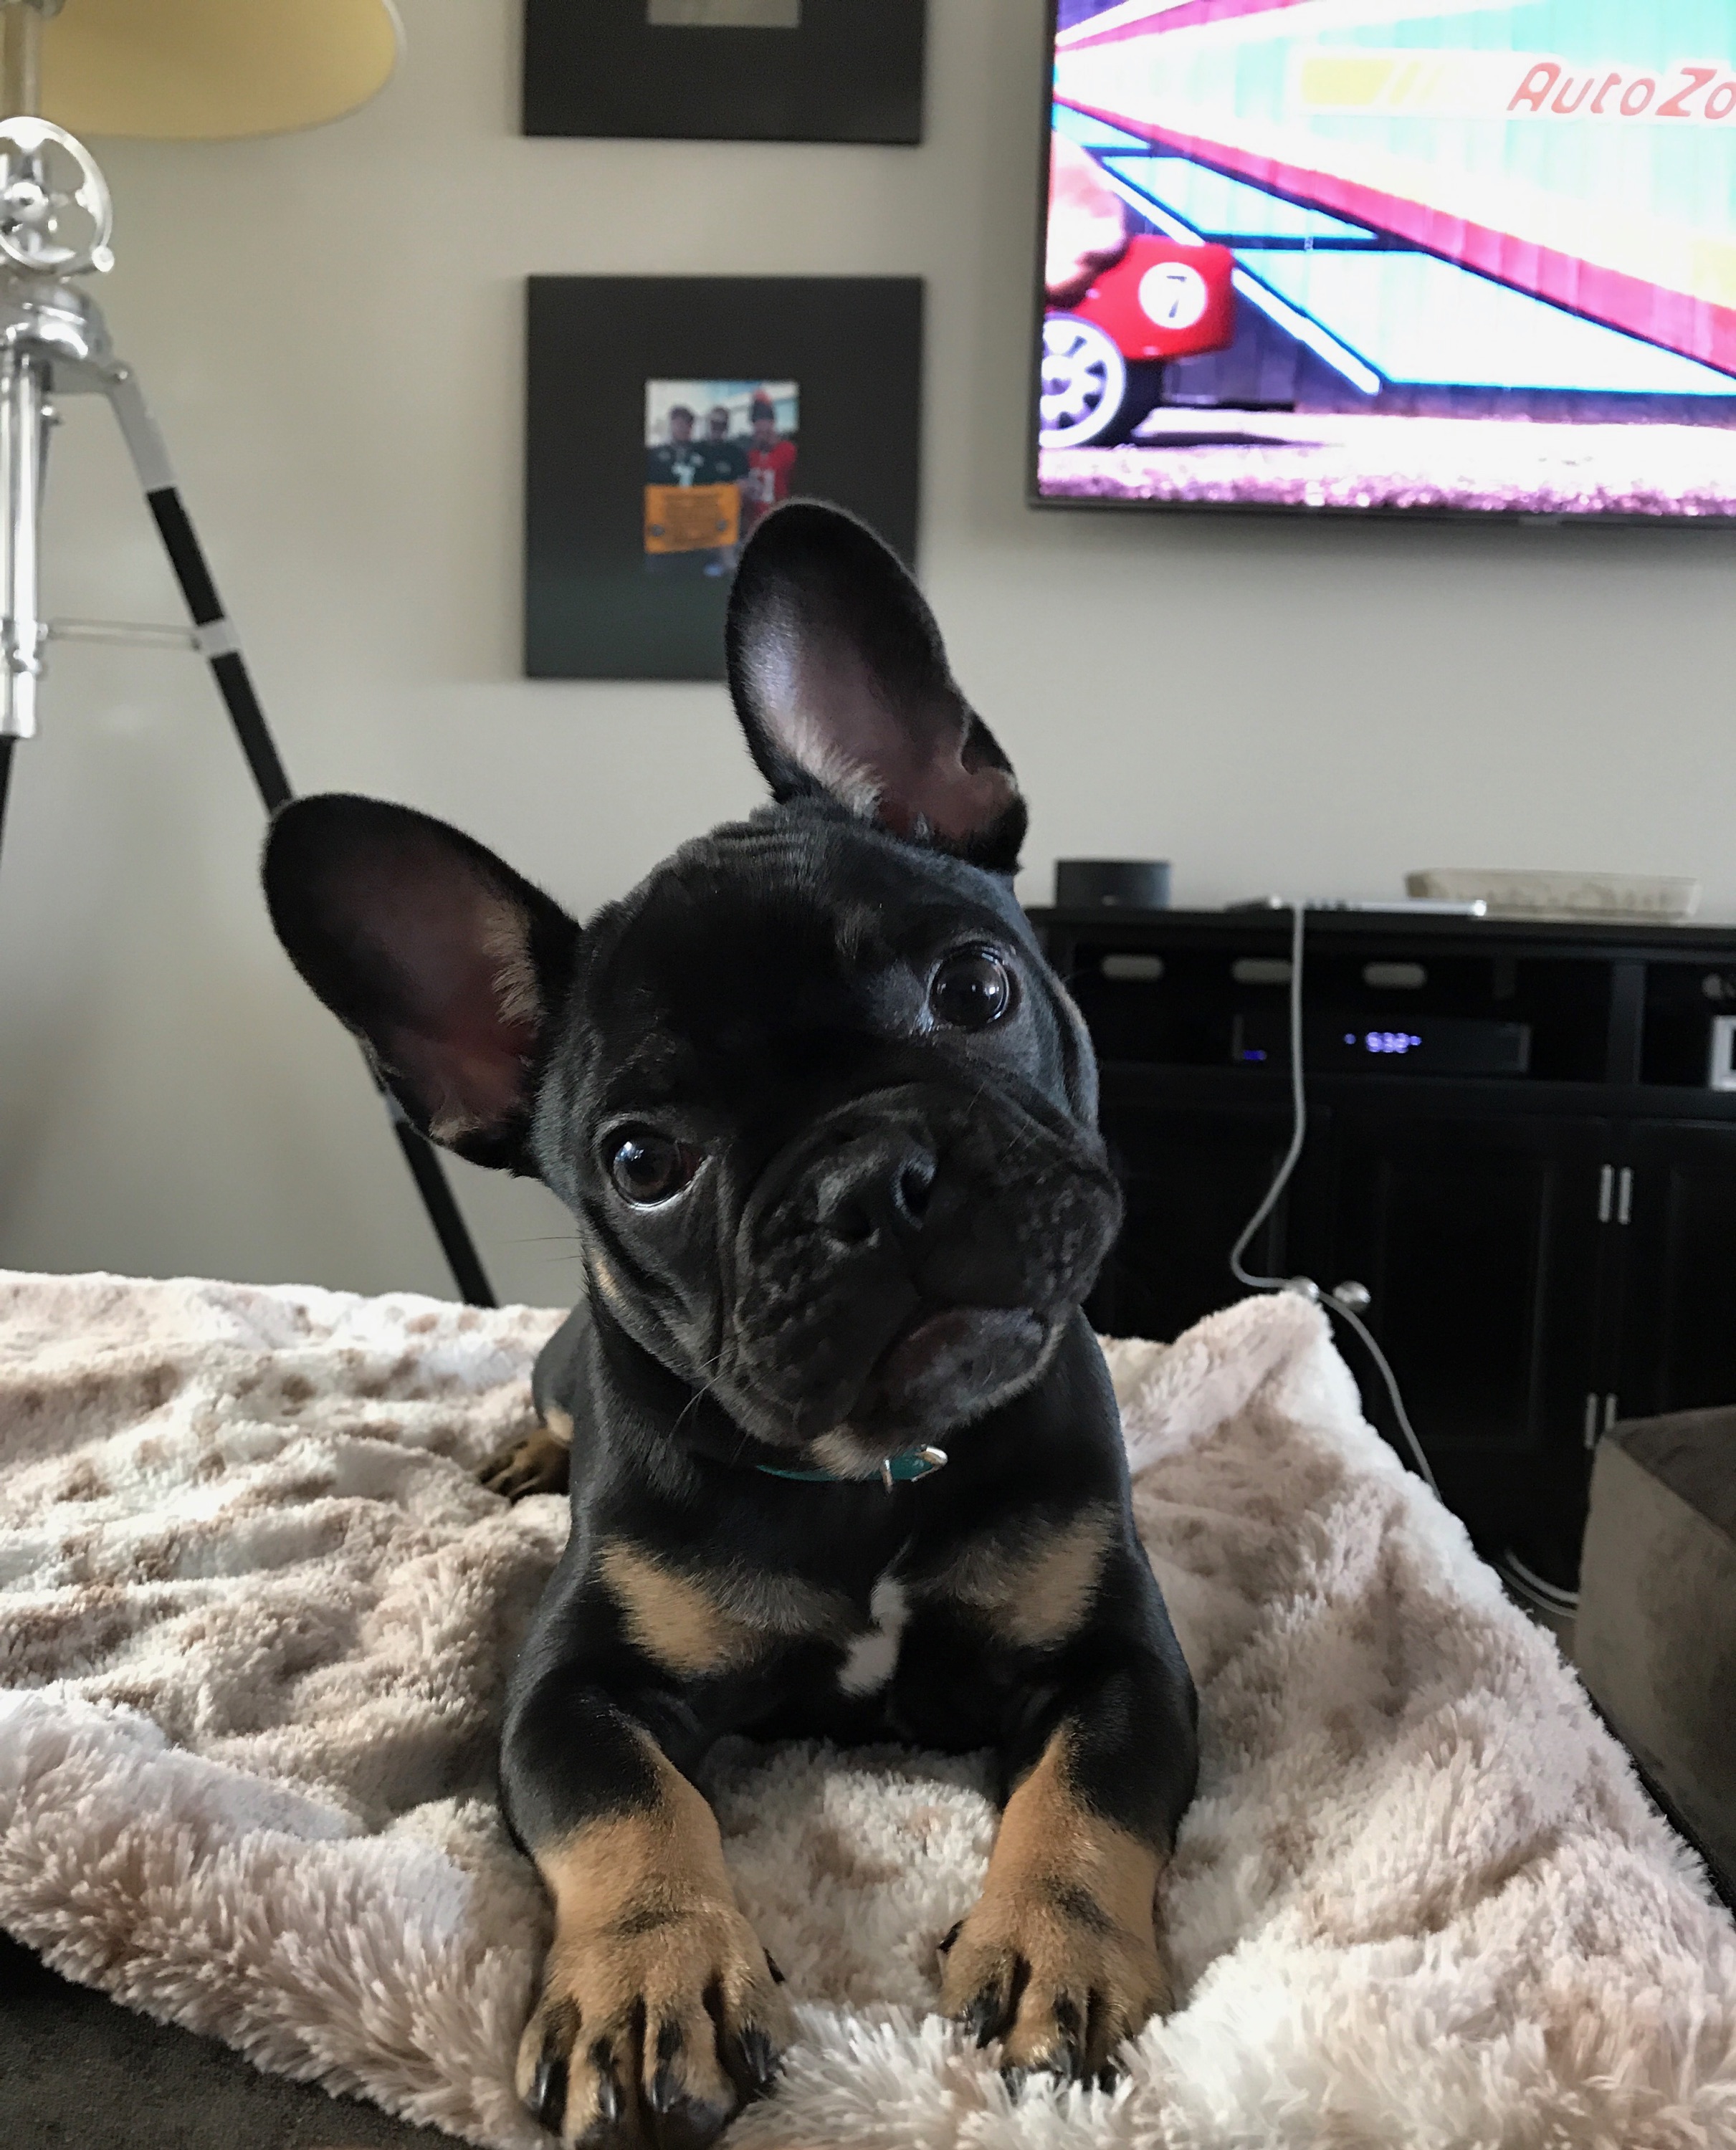 4 month old french bulldog